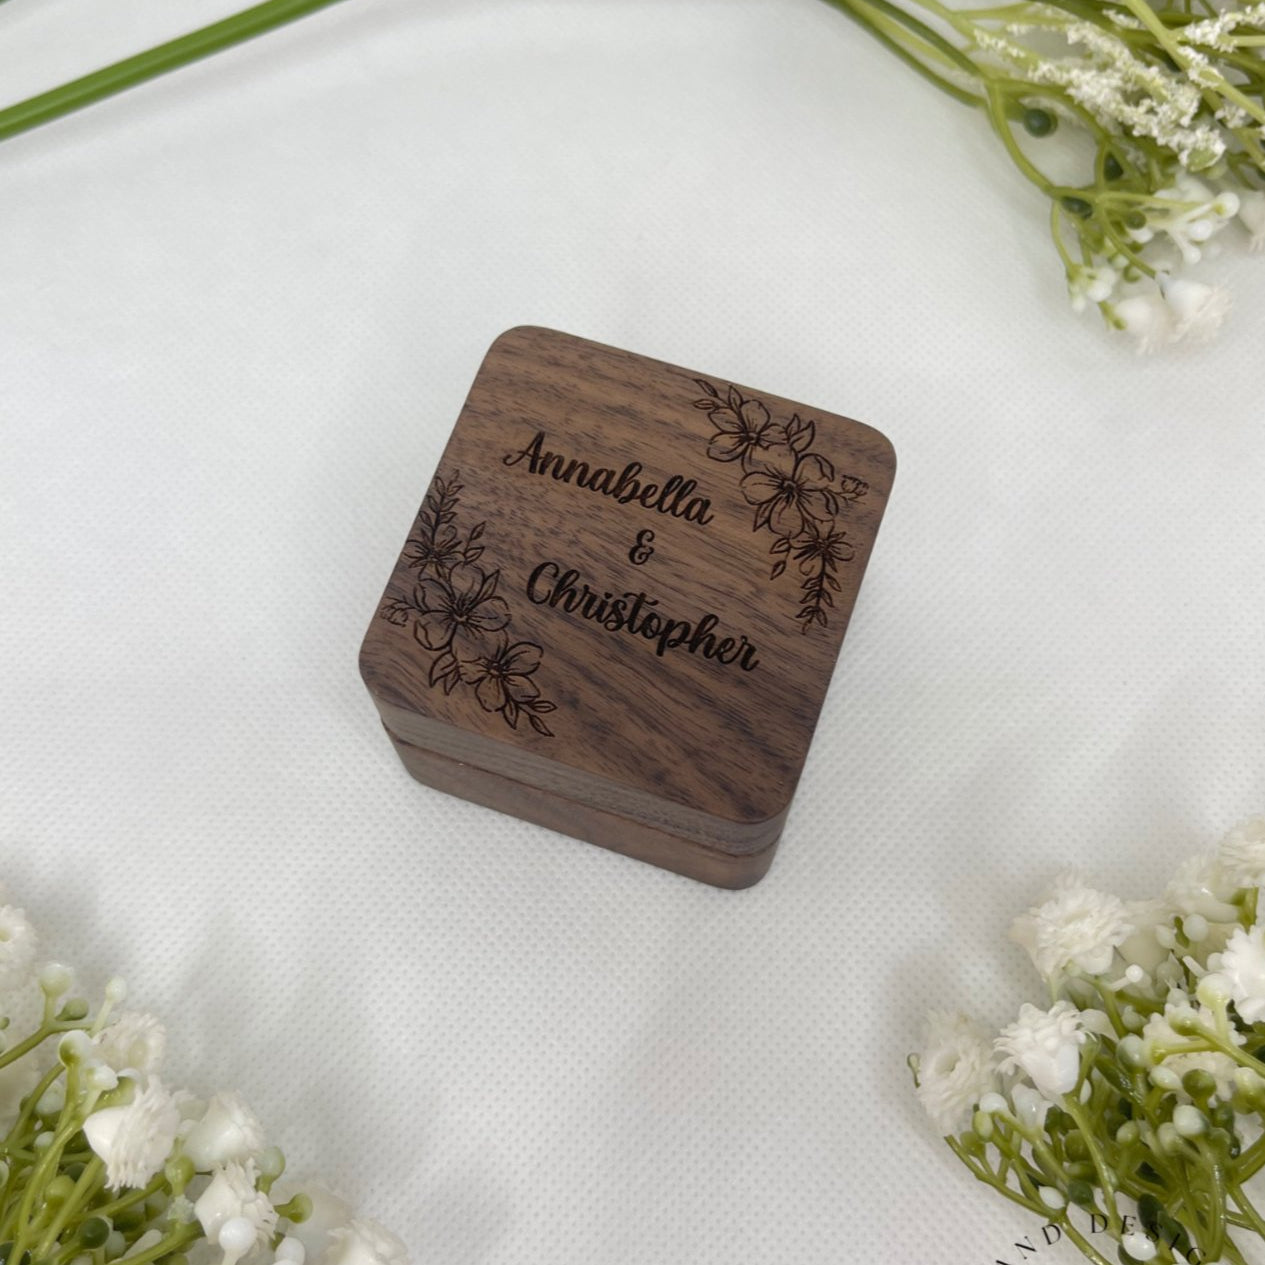 Personalised Double Slot Wooden Ring Box.  This rustic ring box is perfect for you and your soon to be.   Personalise your ring box with two names of your choice. (max characters per name is 15)  Size - Size: 5.5*5.5*4 cm